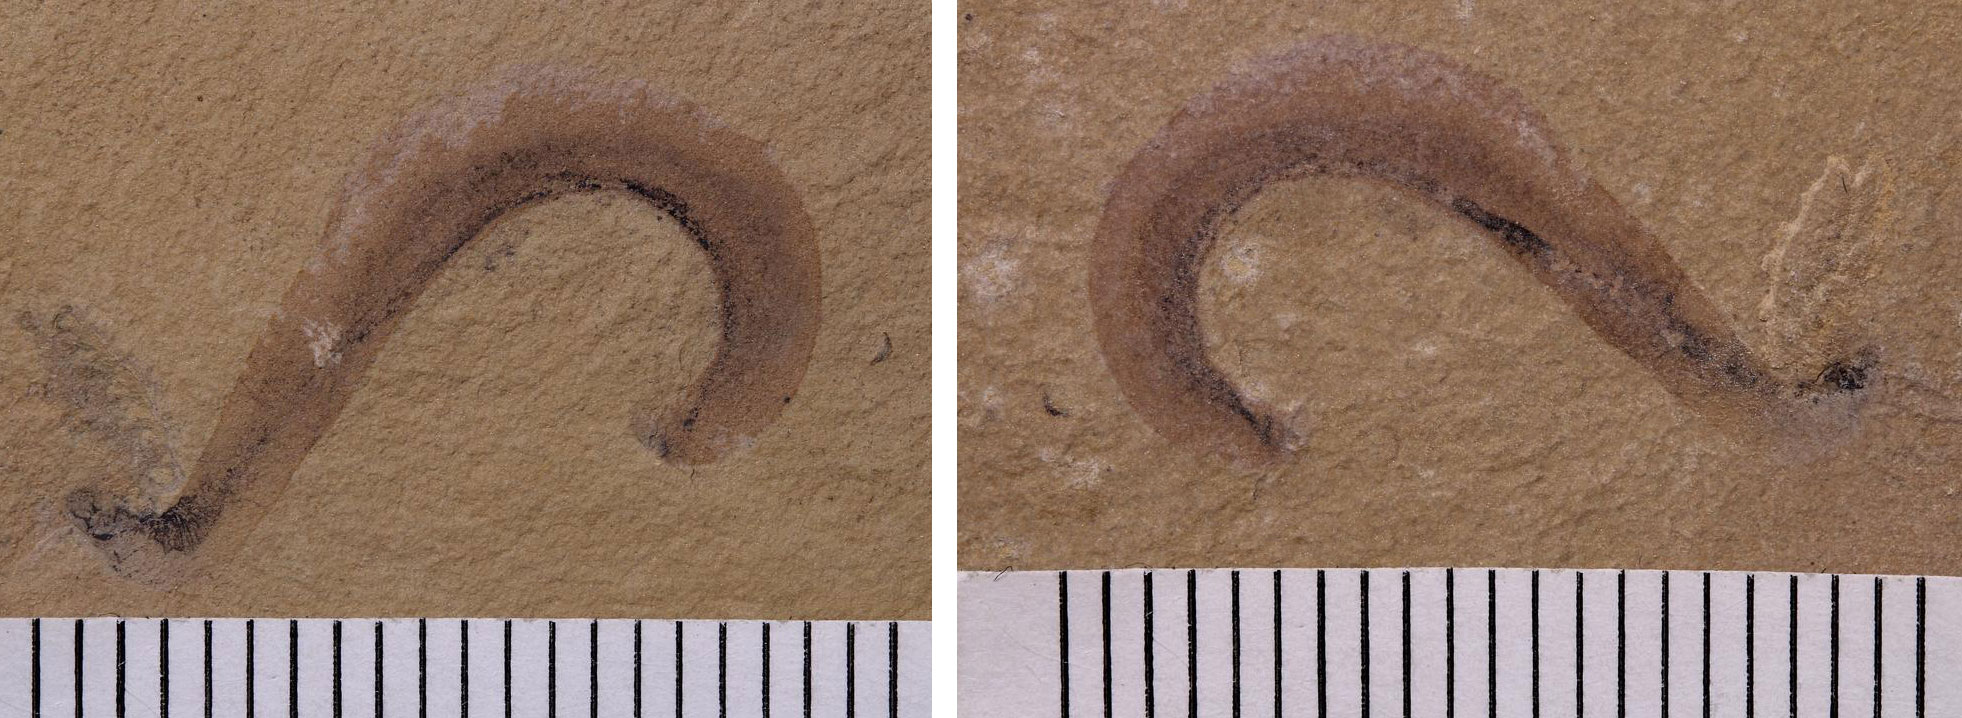 2-Panel image showing photos of a fossil worm from the Cambrian of Utah. Panels show part and counterpart of the same specimen. The worm is preserved in an S-shape and a dark line can be seen on its body.